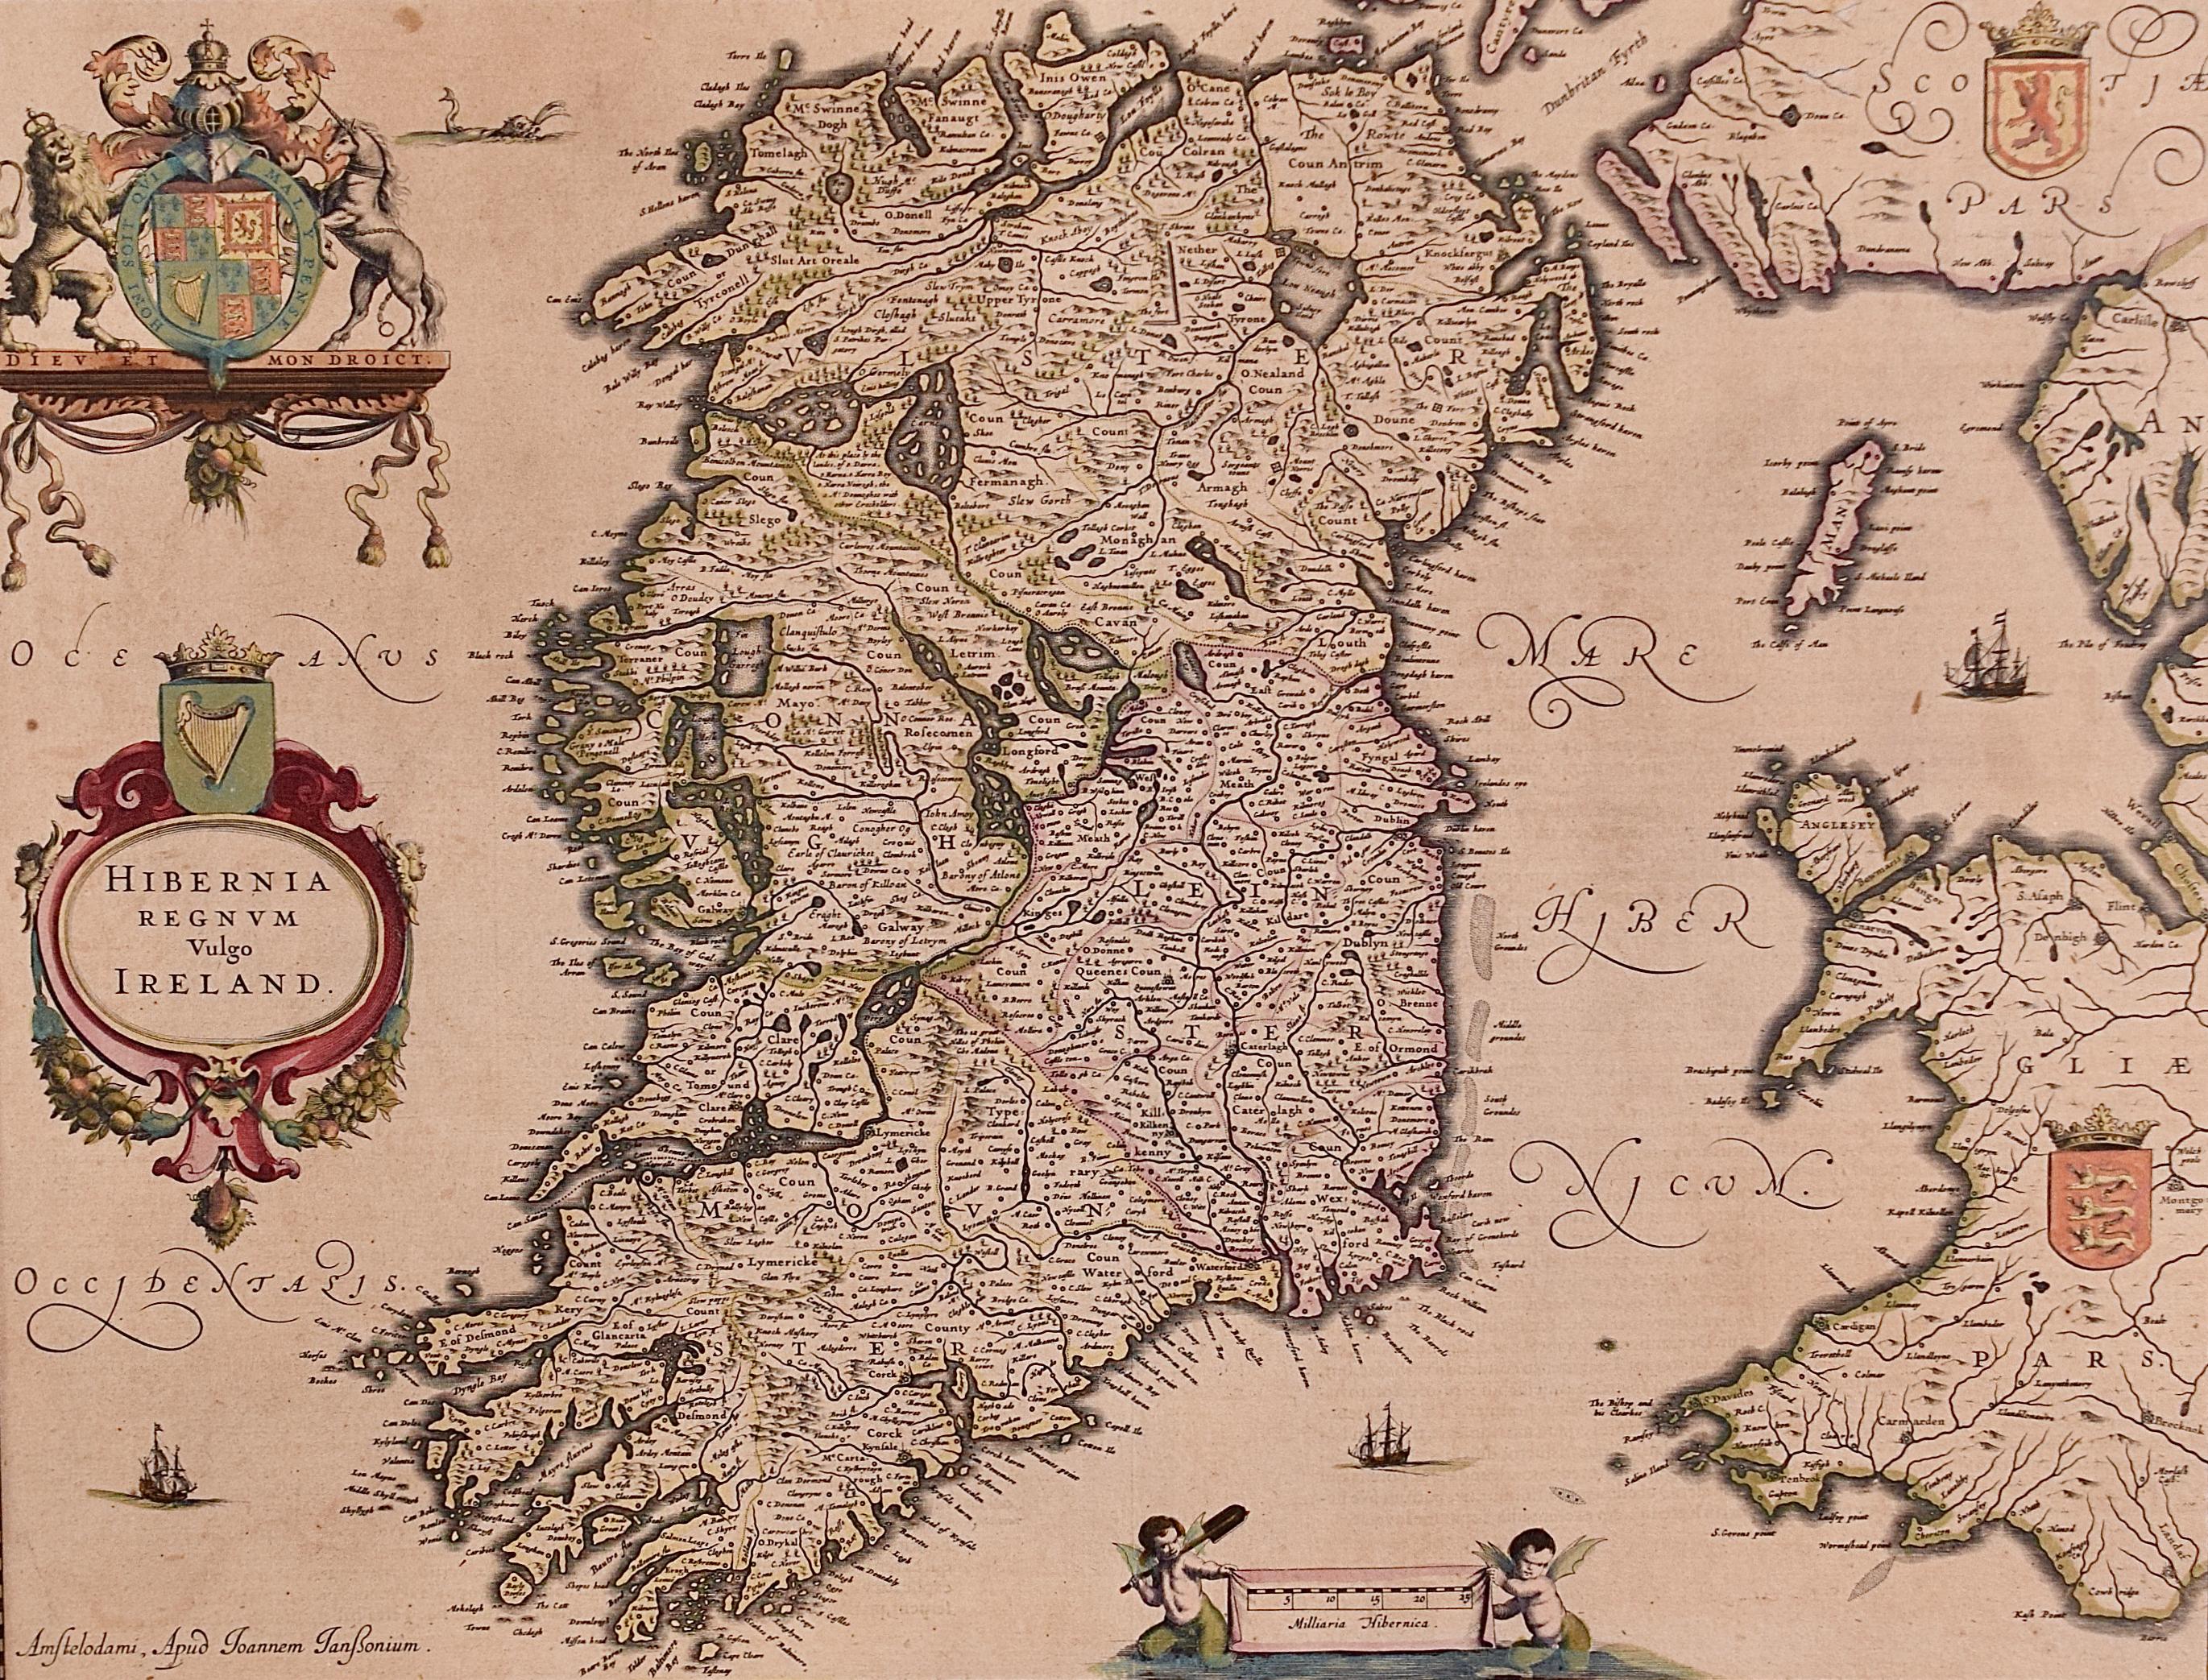 Ireland: A Framed 17th Century Hand-colored Map by Jan Jannson - Print by Johannes Janssonius